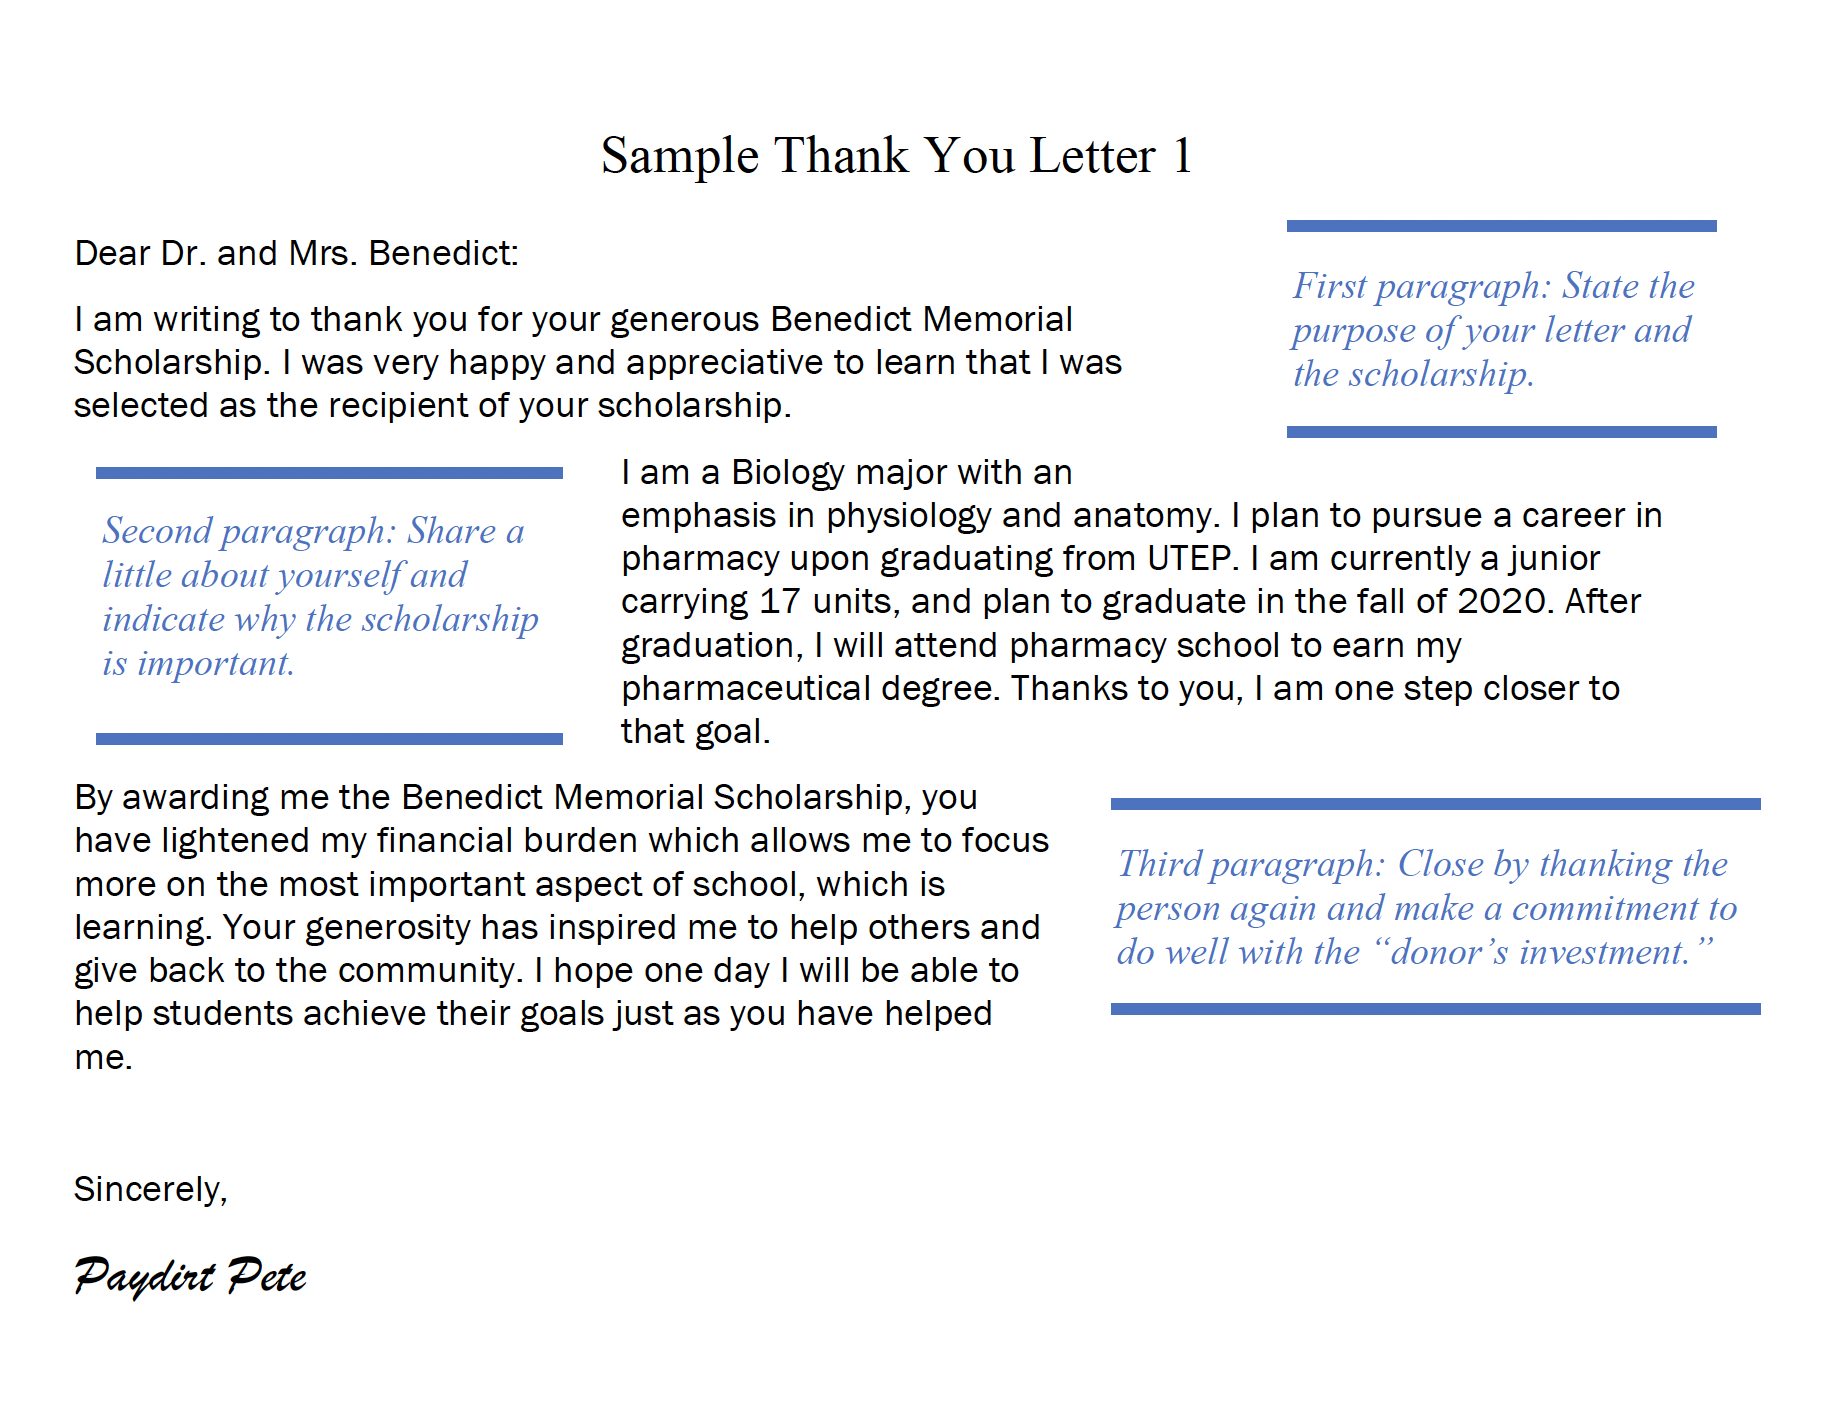 Thank_You_Letter_Sample_1.png